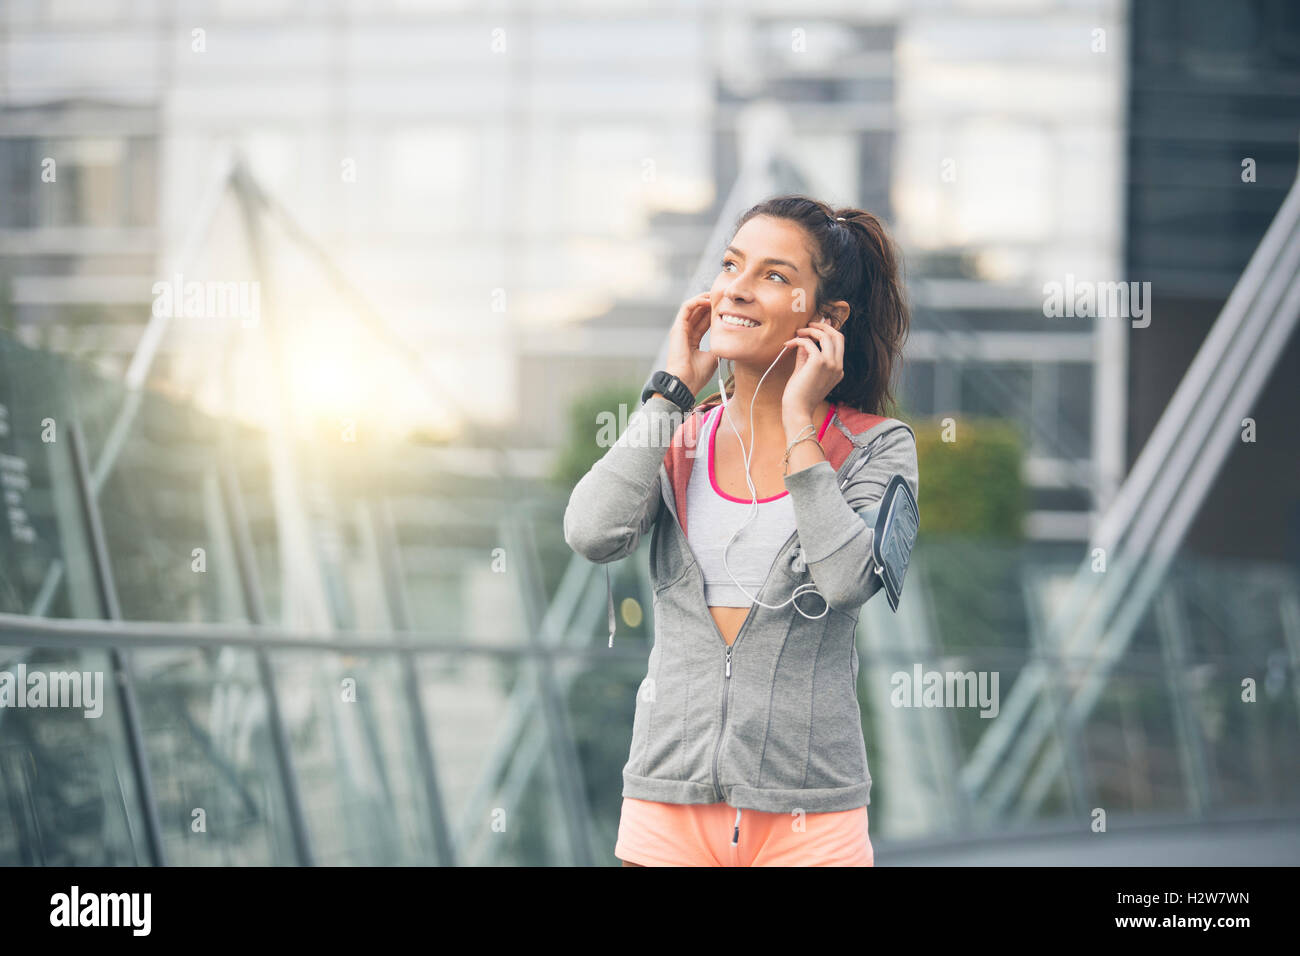 Beautiful young woman runner athlete insert her earphones during training Stock Photo